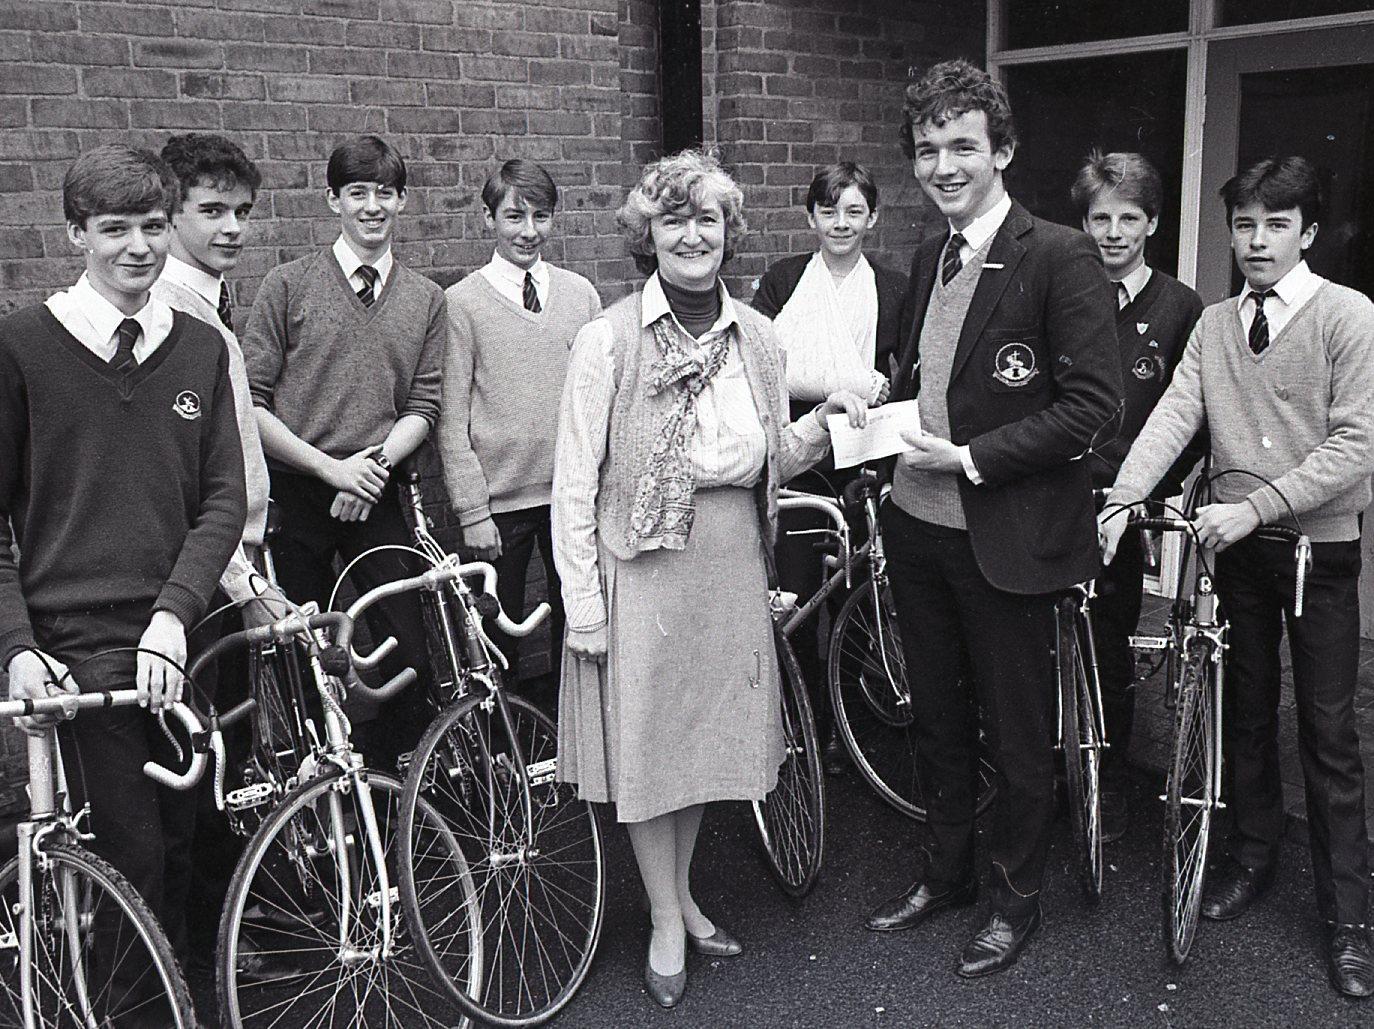 Nine fifth formers from St. Cuthbert Mayne High School, Preston, presented Mrs Margaret O'Donoghue, secretary of the St. Catherine's Hospice Appeal, with a cheque for 185 after completing a cycle ride. Presenting the cheque is the deputy head boy Howard Martin, with, from left, David Cracknell, Michael Laytham, Martin Harris, Nigel Geraghty, Gary Singleton, Chris Stephenson and John Sharples. Richard Ibison, who also rook part in the sponsored ride, is missing from the photograph